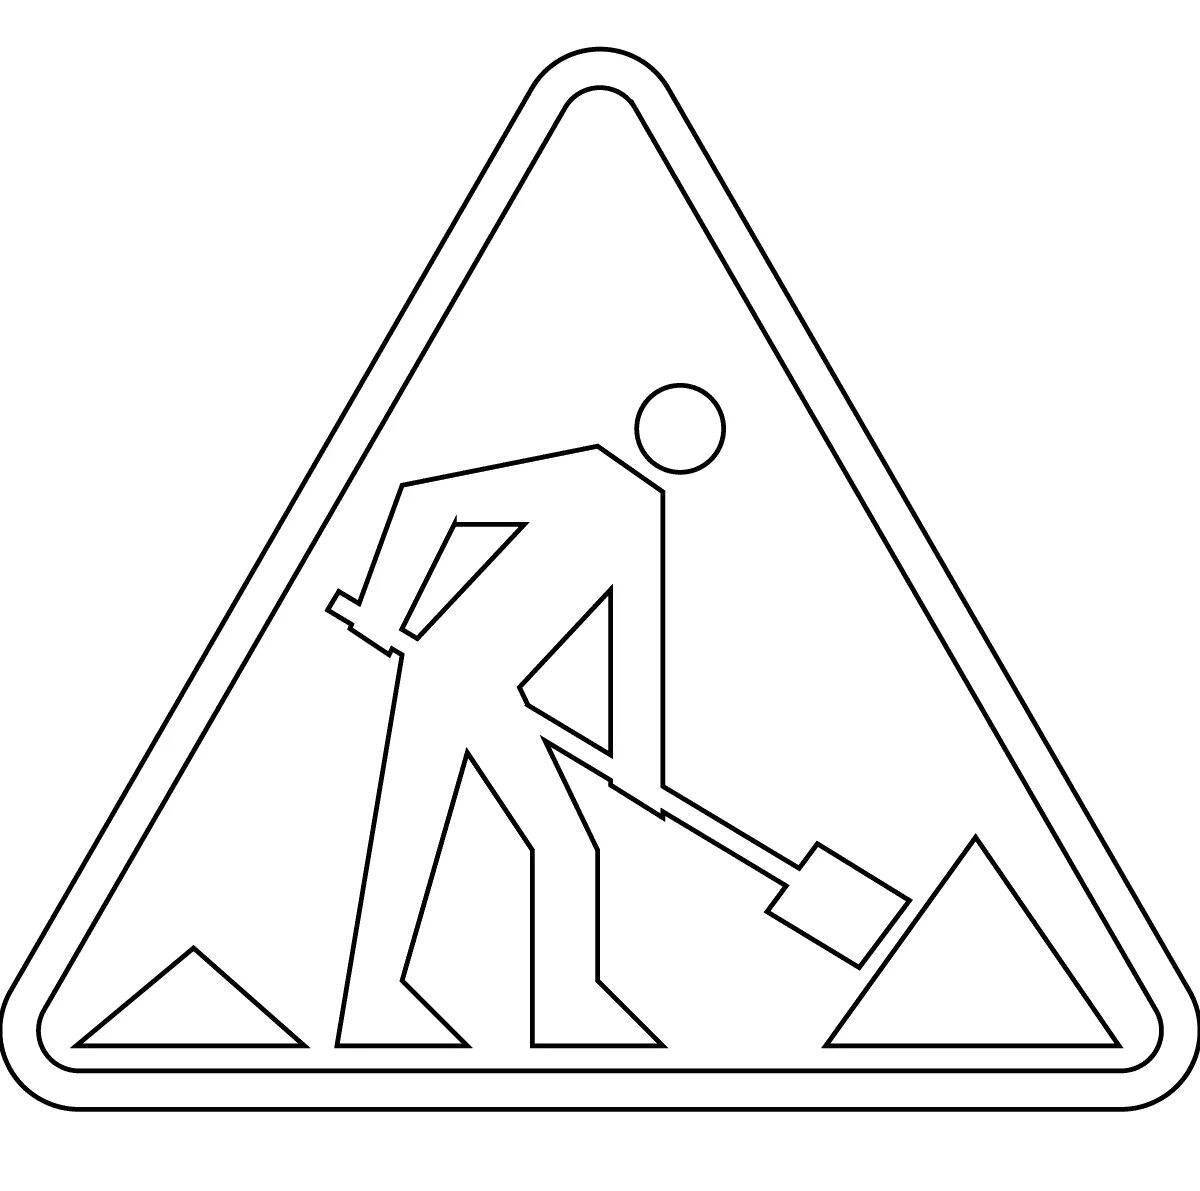 Coloring pages fat pedestrian signs